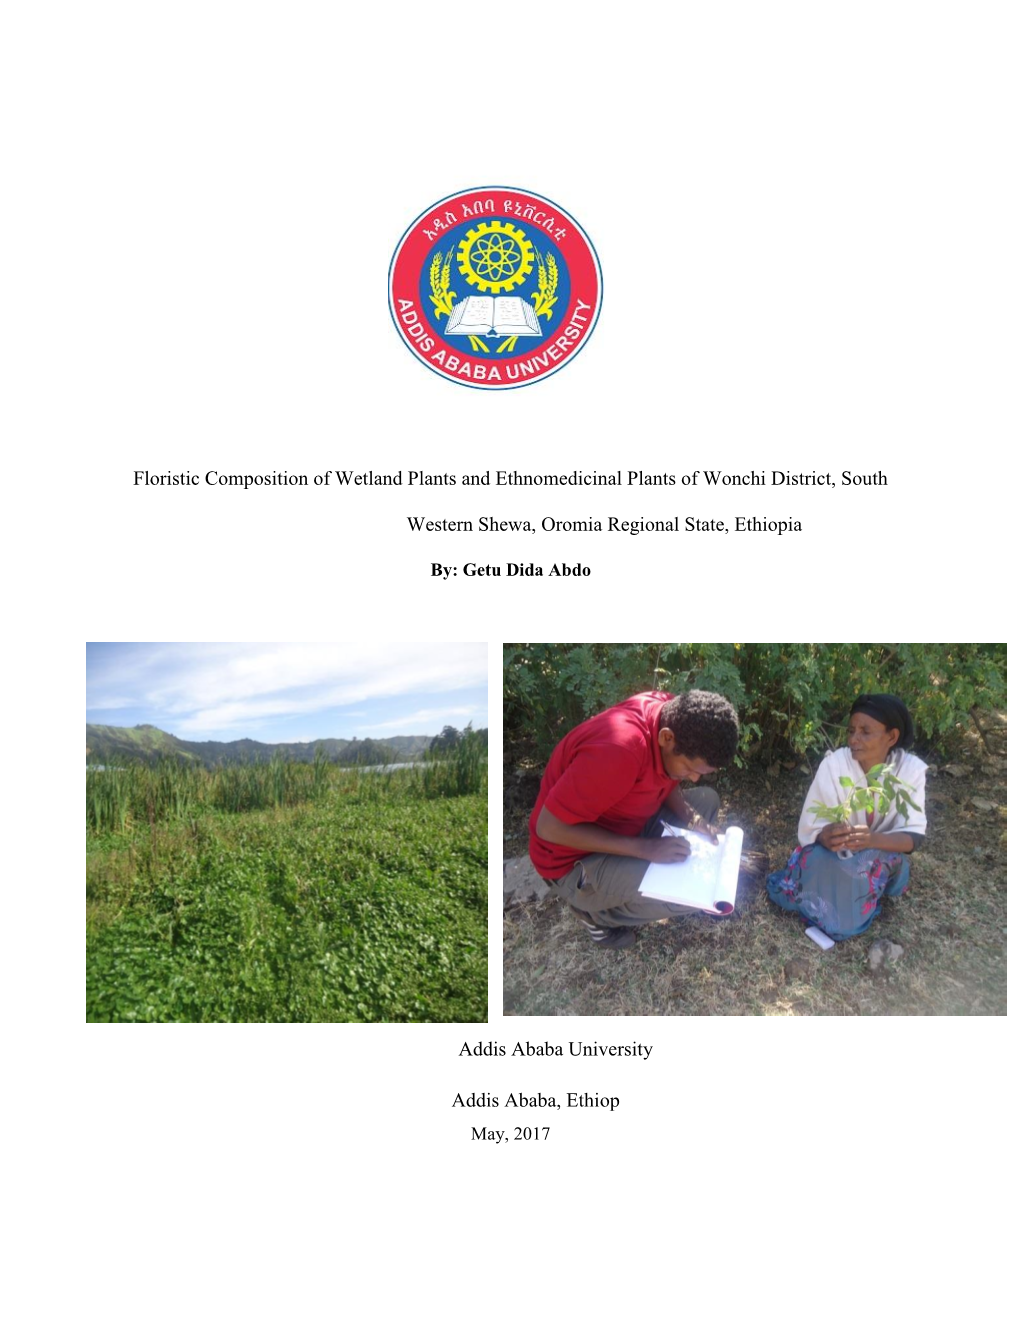 Floristic Composition of Wetland Plants and Ethnomedicinal Plants of Wonchi District, South